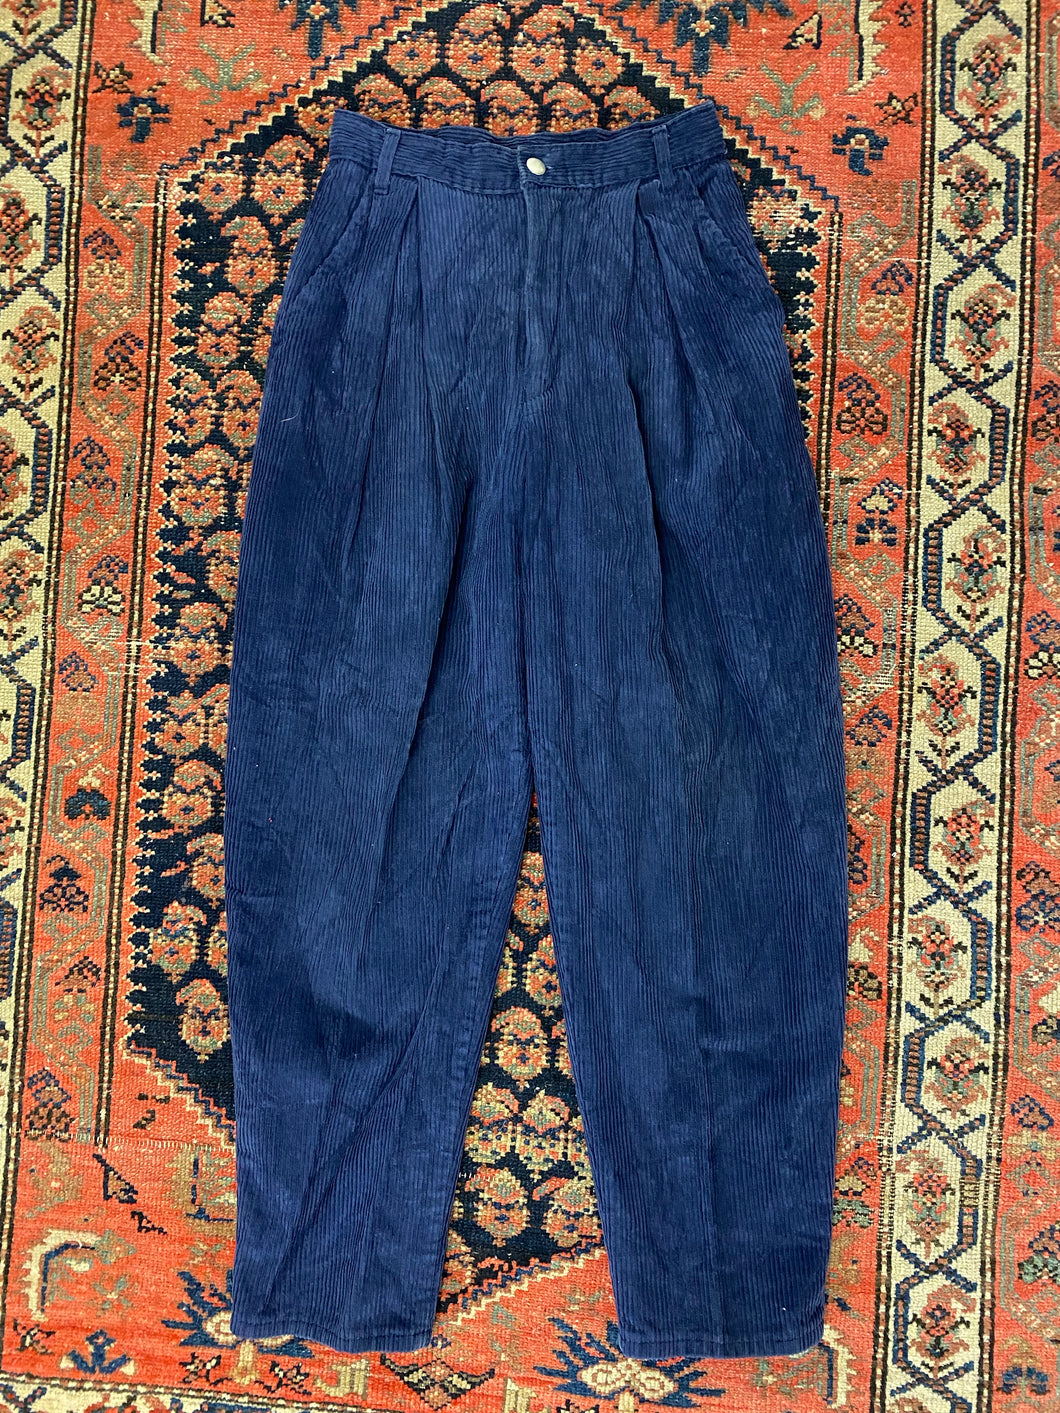 Vintage Pleated High Waisted Corduroy Pants - 26inches